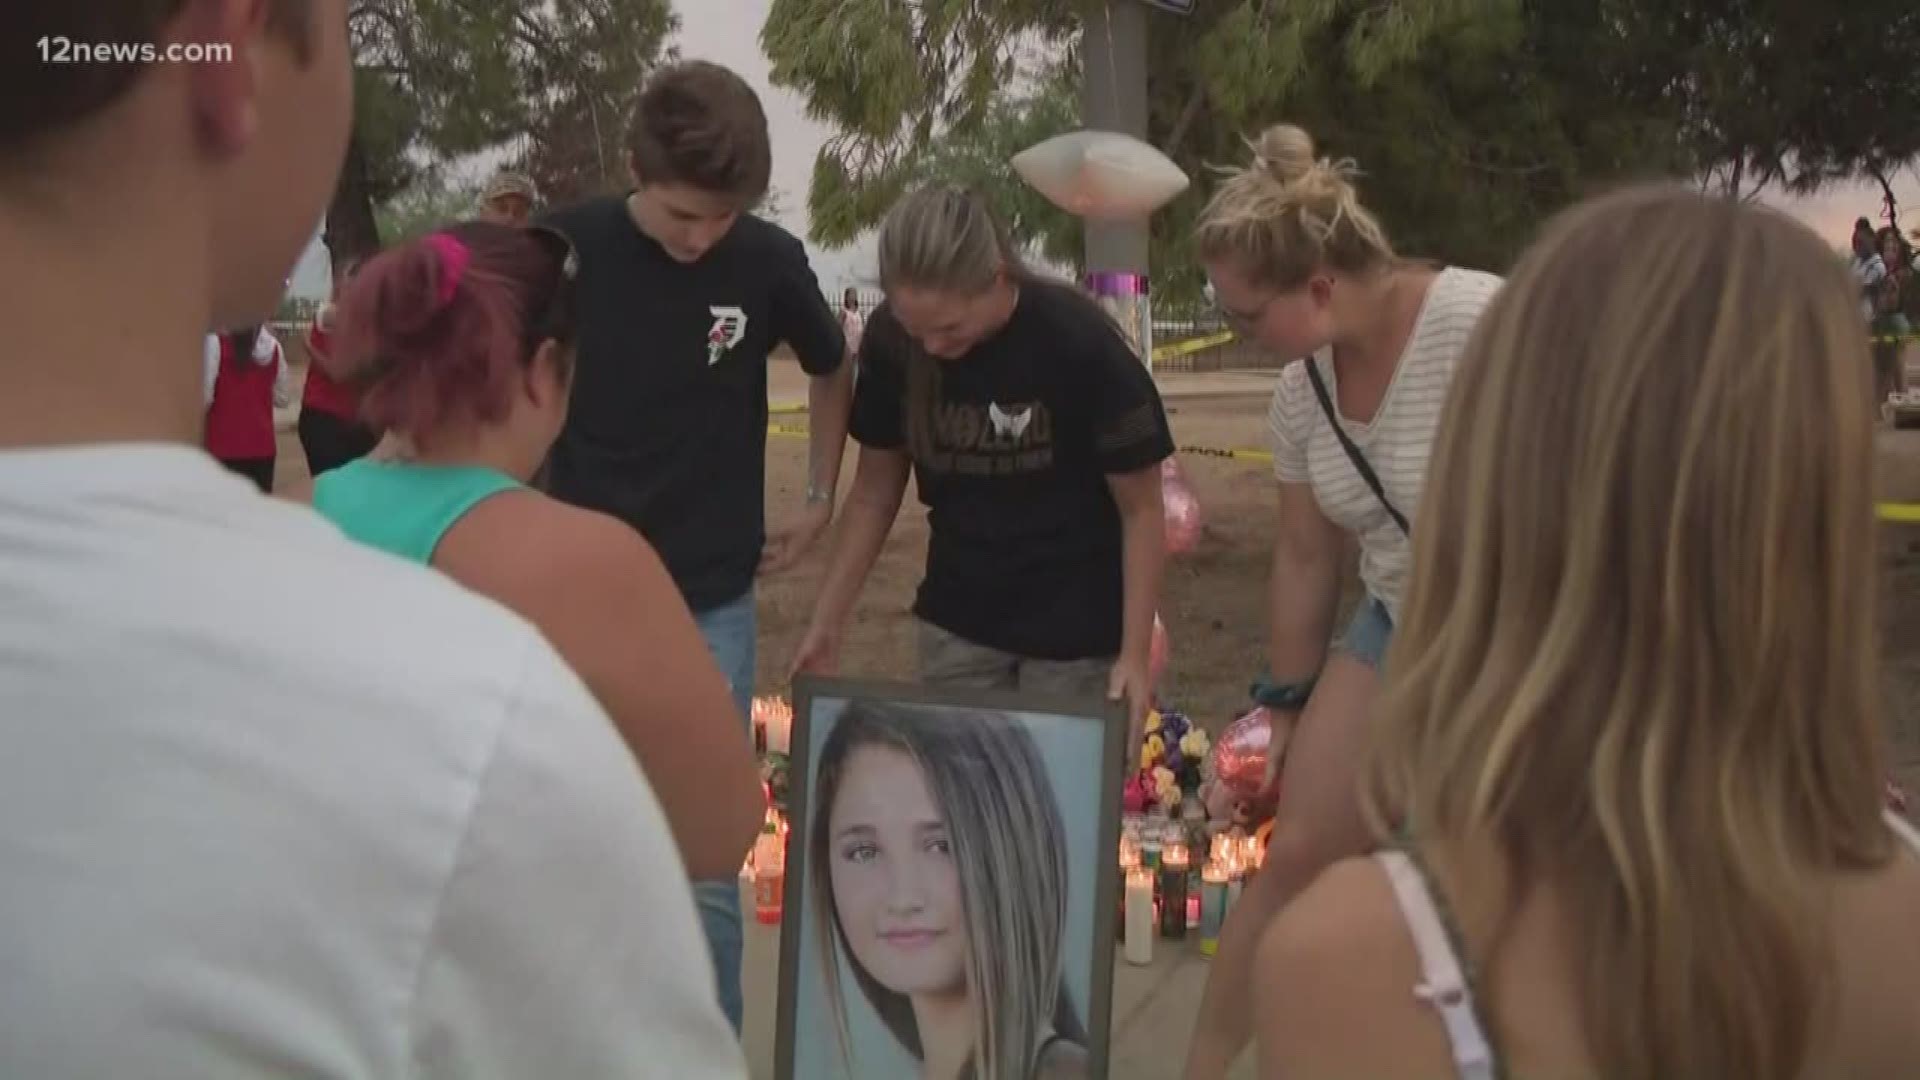 Hundreds came to a candlelight vigil Monday night to remember Ella Thomas and honor her life.